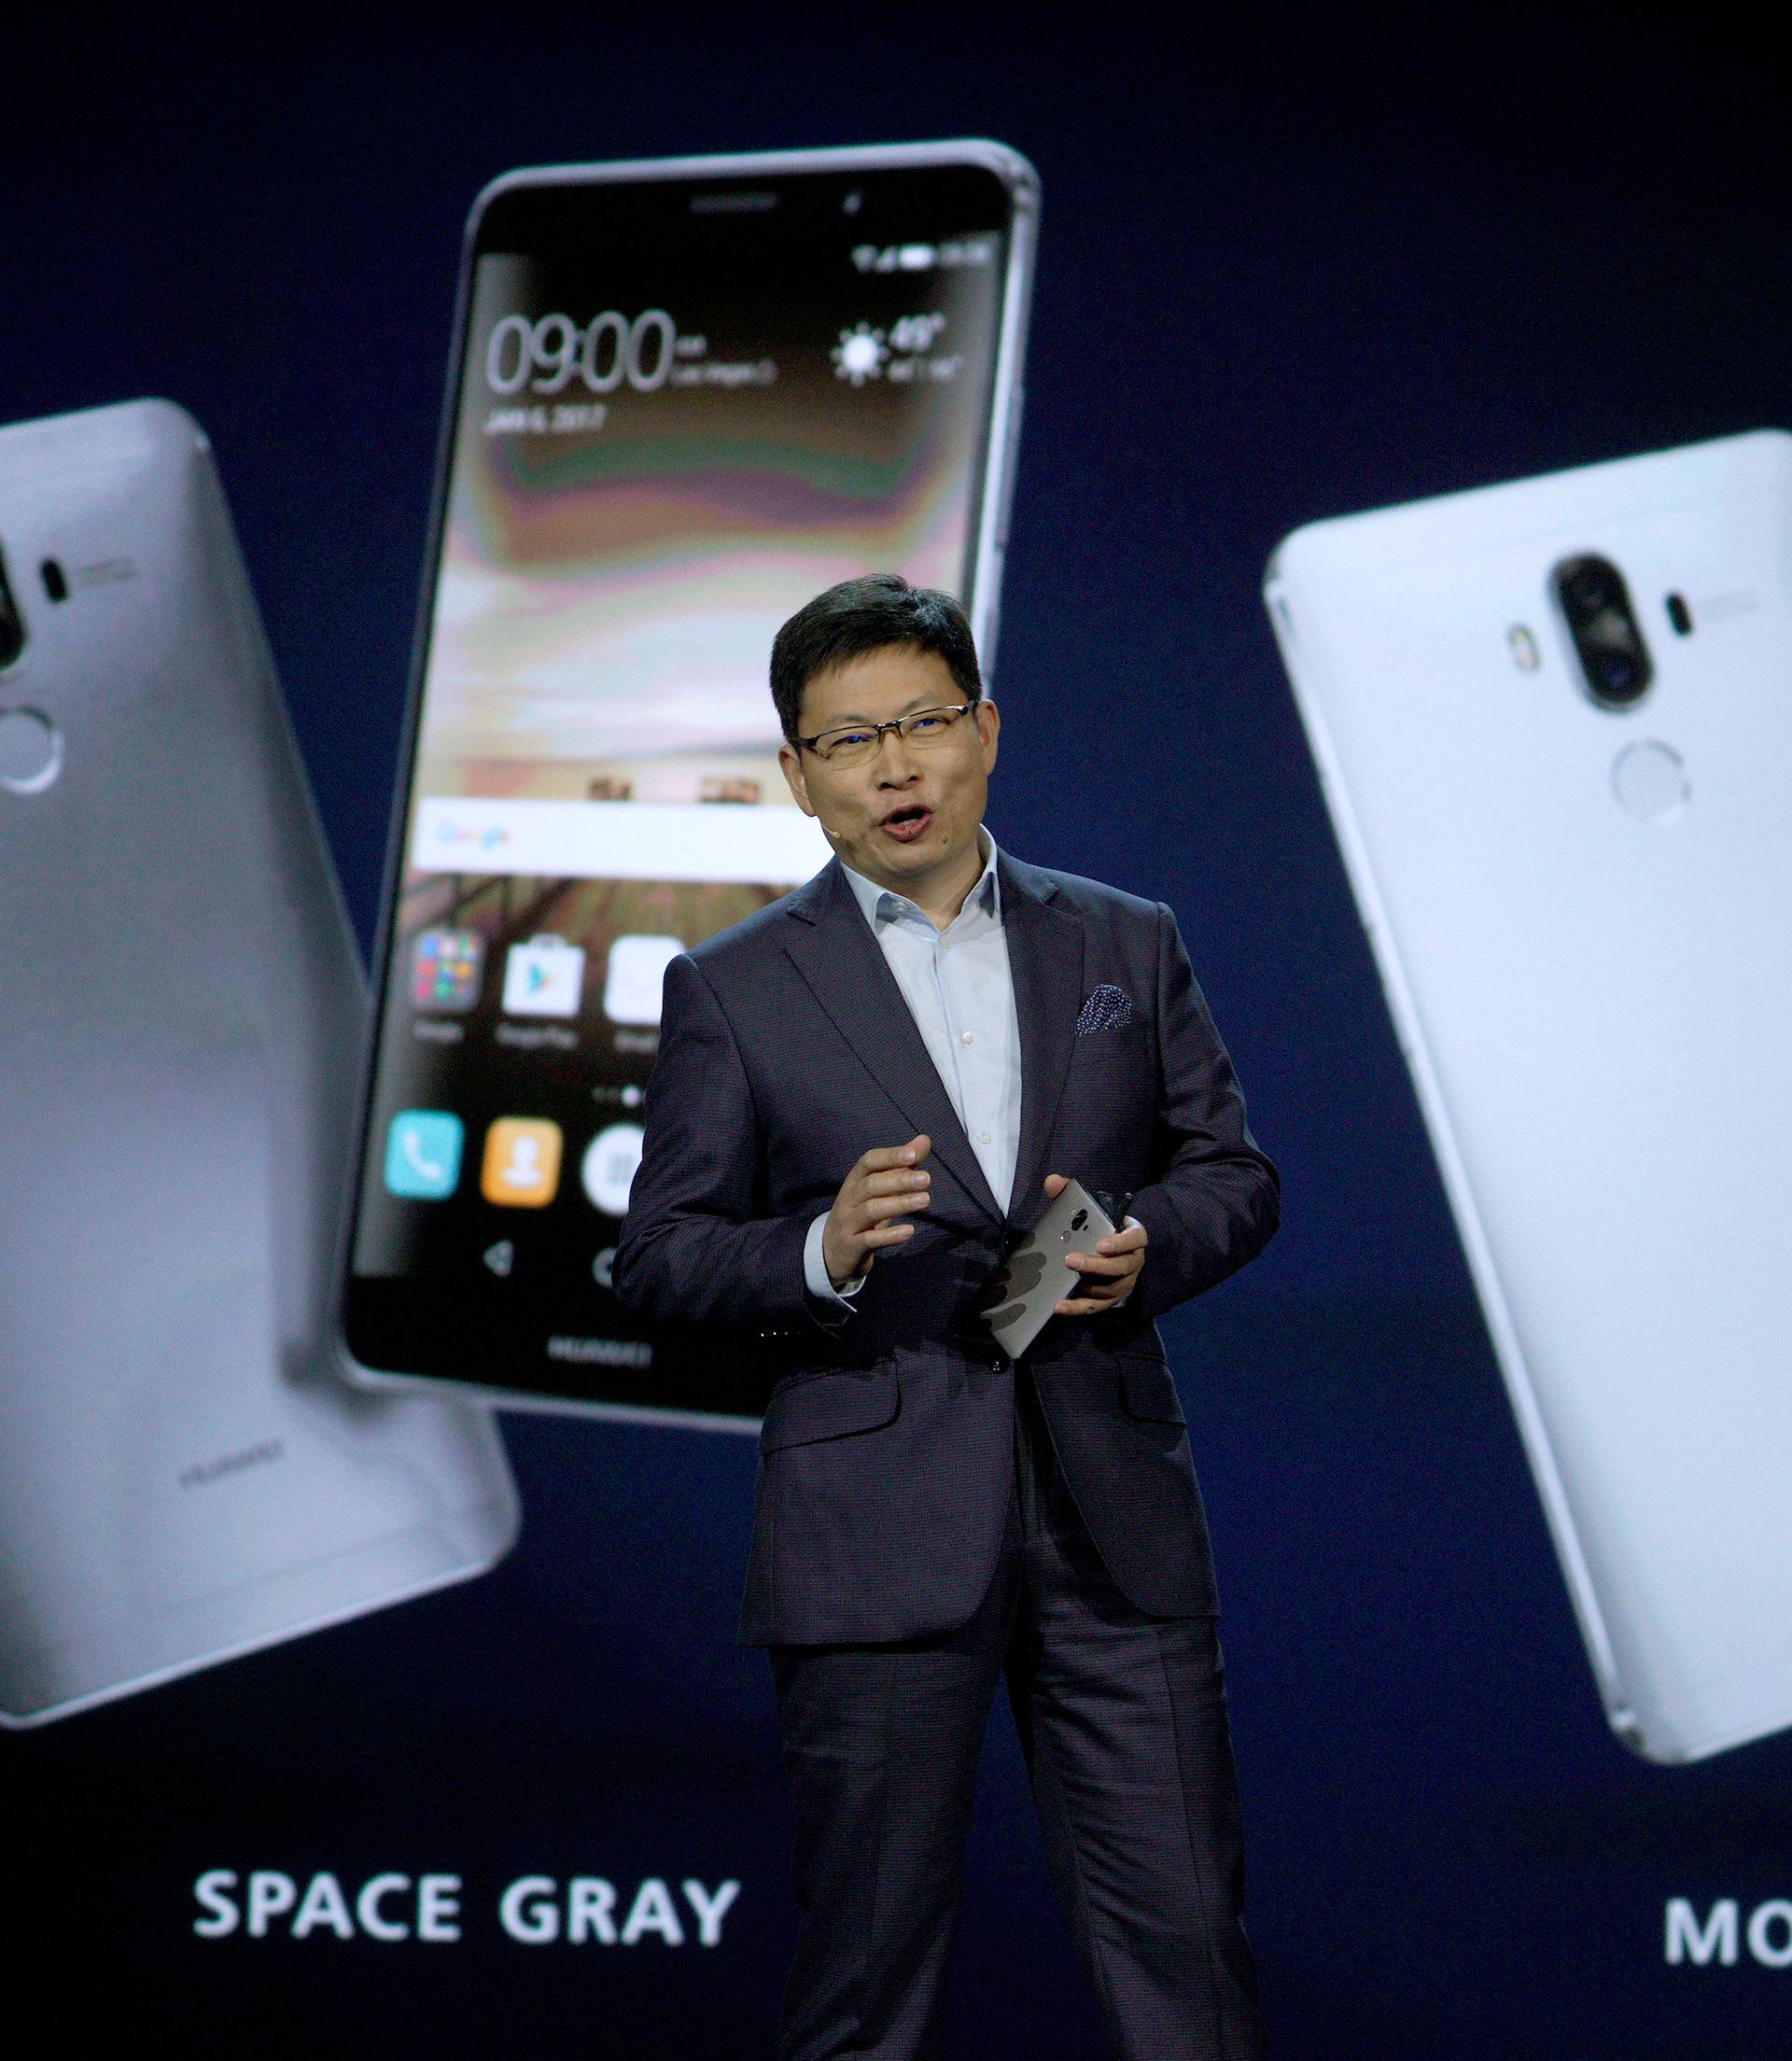 Richard Yu, Huawei CEO Consumer Business Group, talks about their Huawei Mate 9 smartphone just released to the U.S. market and displayed behind him during his keynote address at CES in Las Vegas